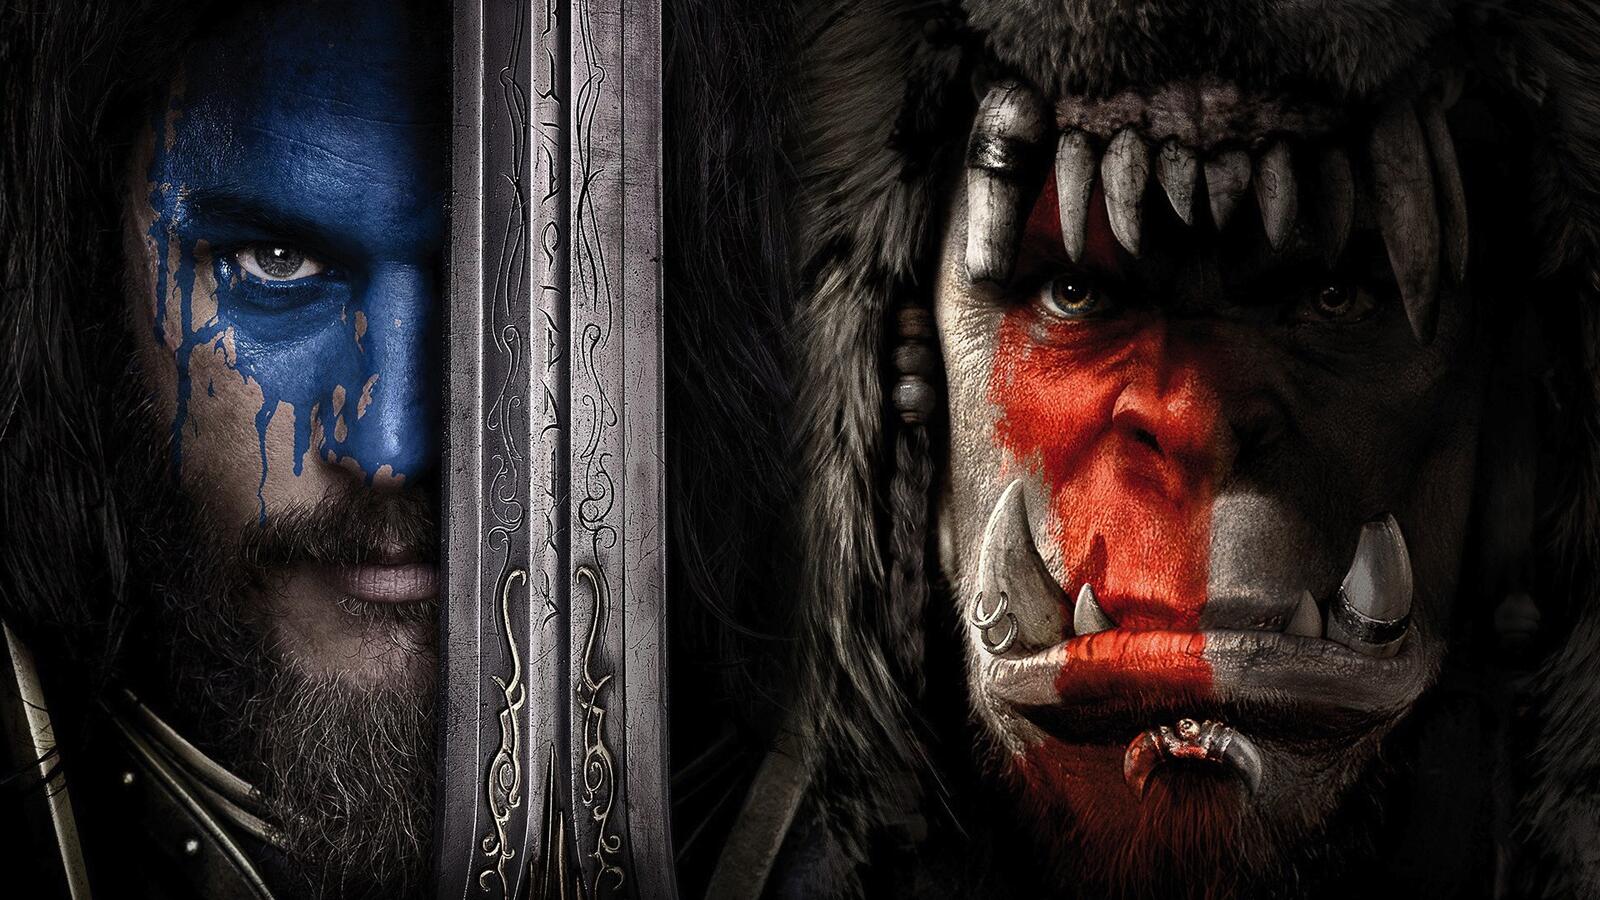 Wallpapers warcraft movies 2016 movies on the desktop